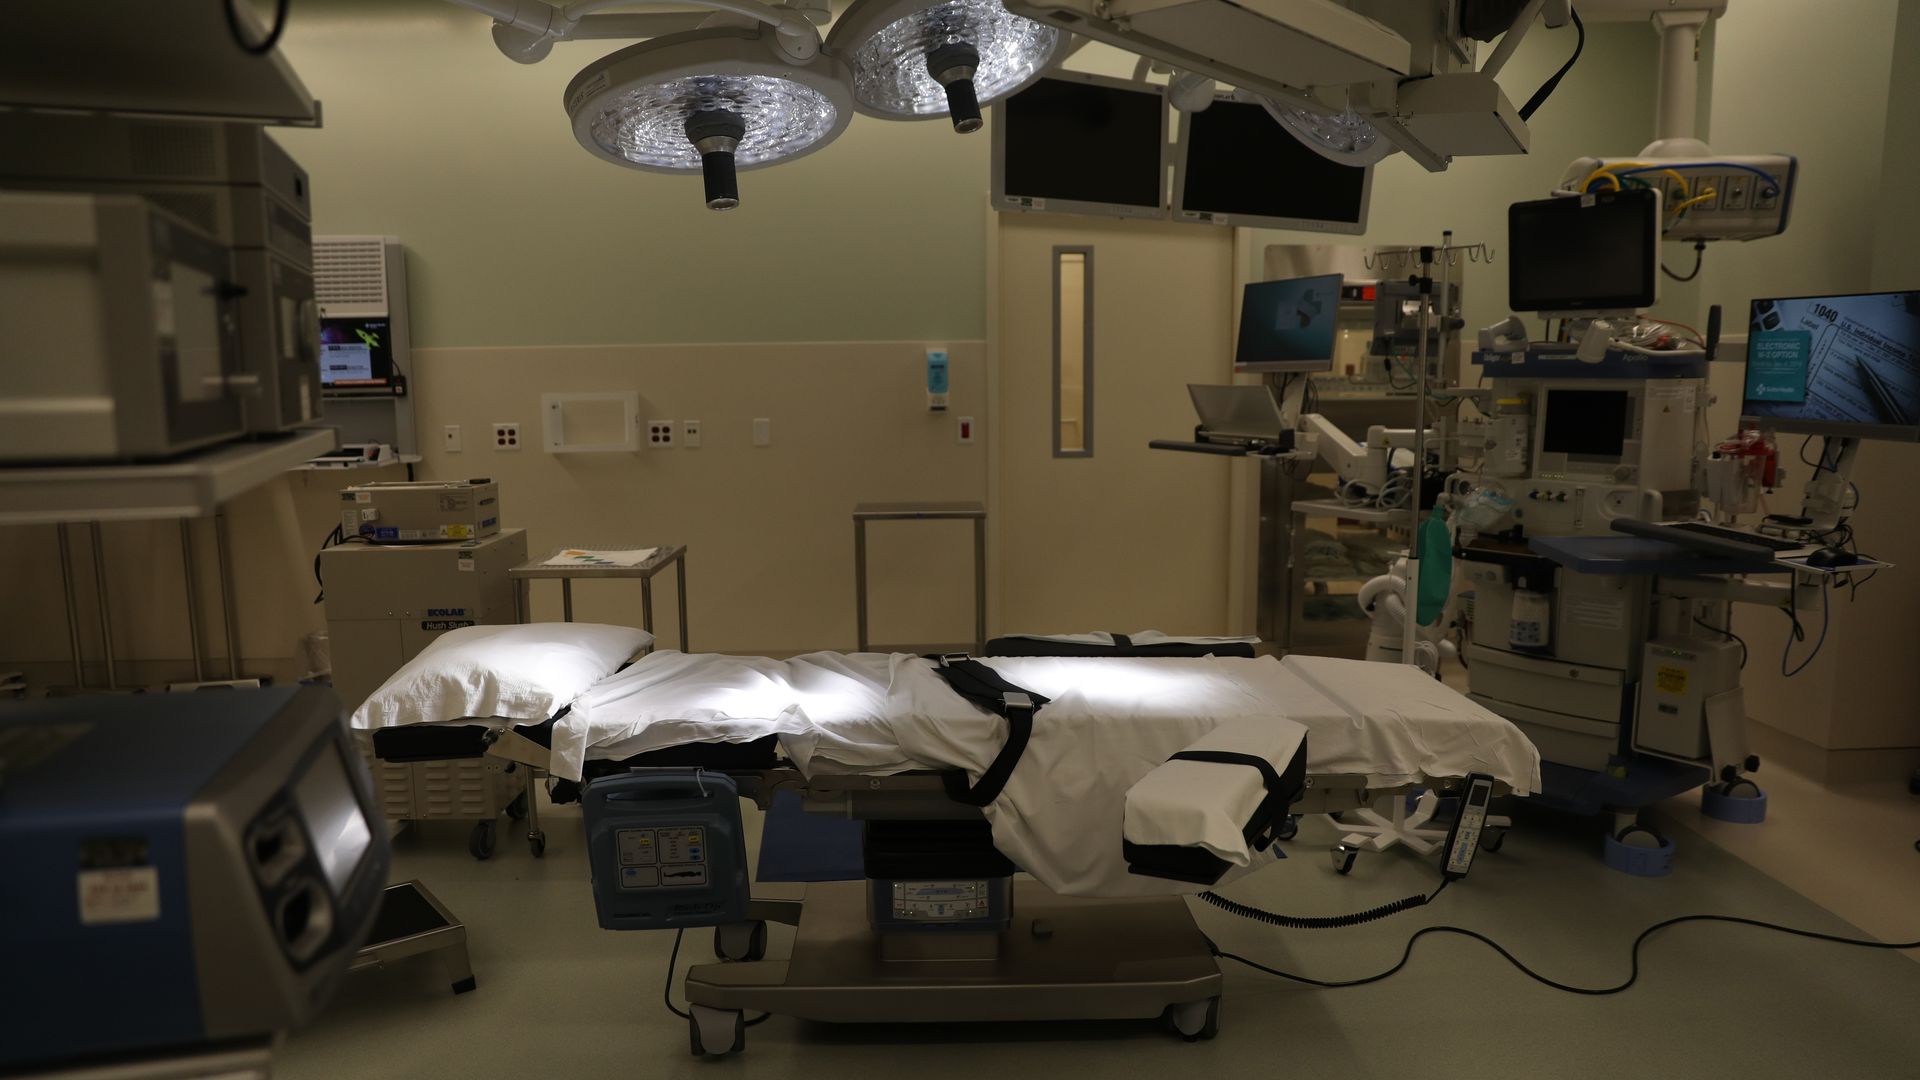 An operating room bed with lights, computers, equipment and devices surrounding it.